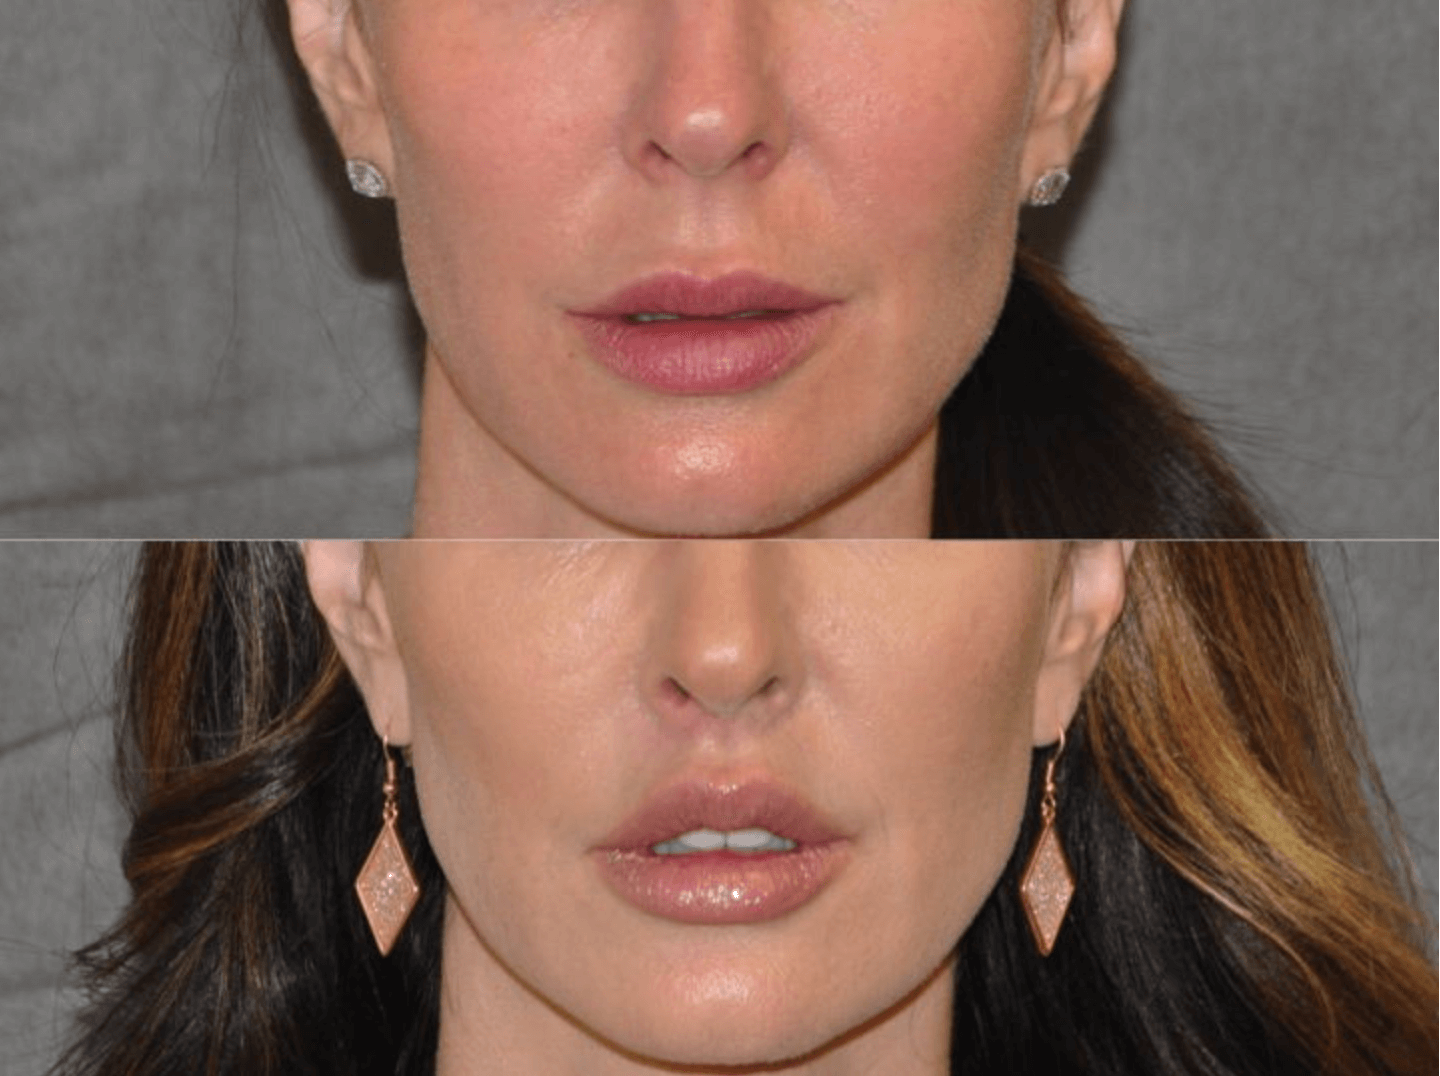 Dental Lip Lift before and after photos